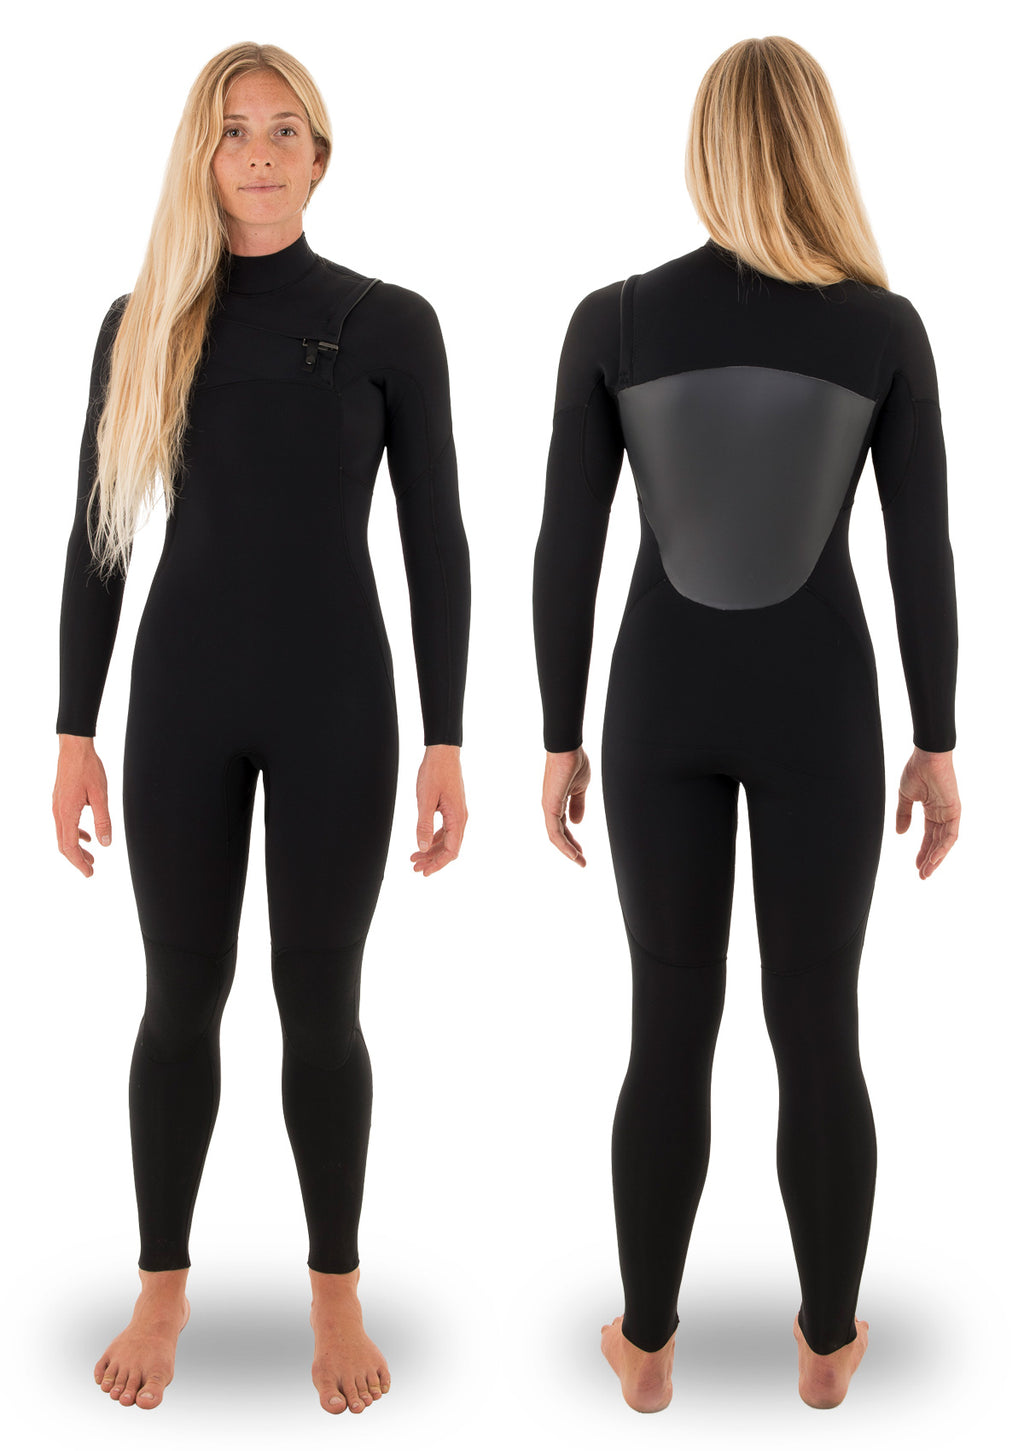 needessentials womens 4/3 chest zip thermal winter wetsuit surfing black non branded